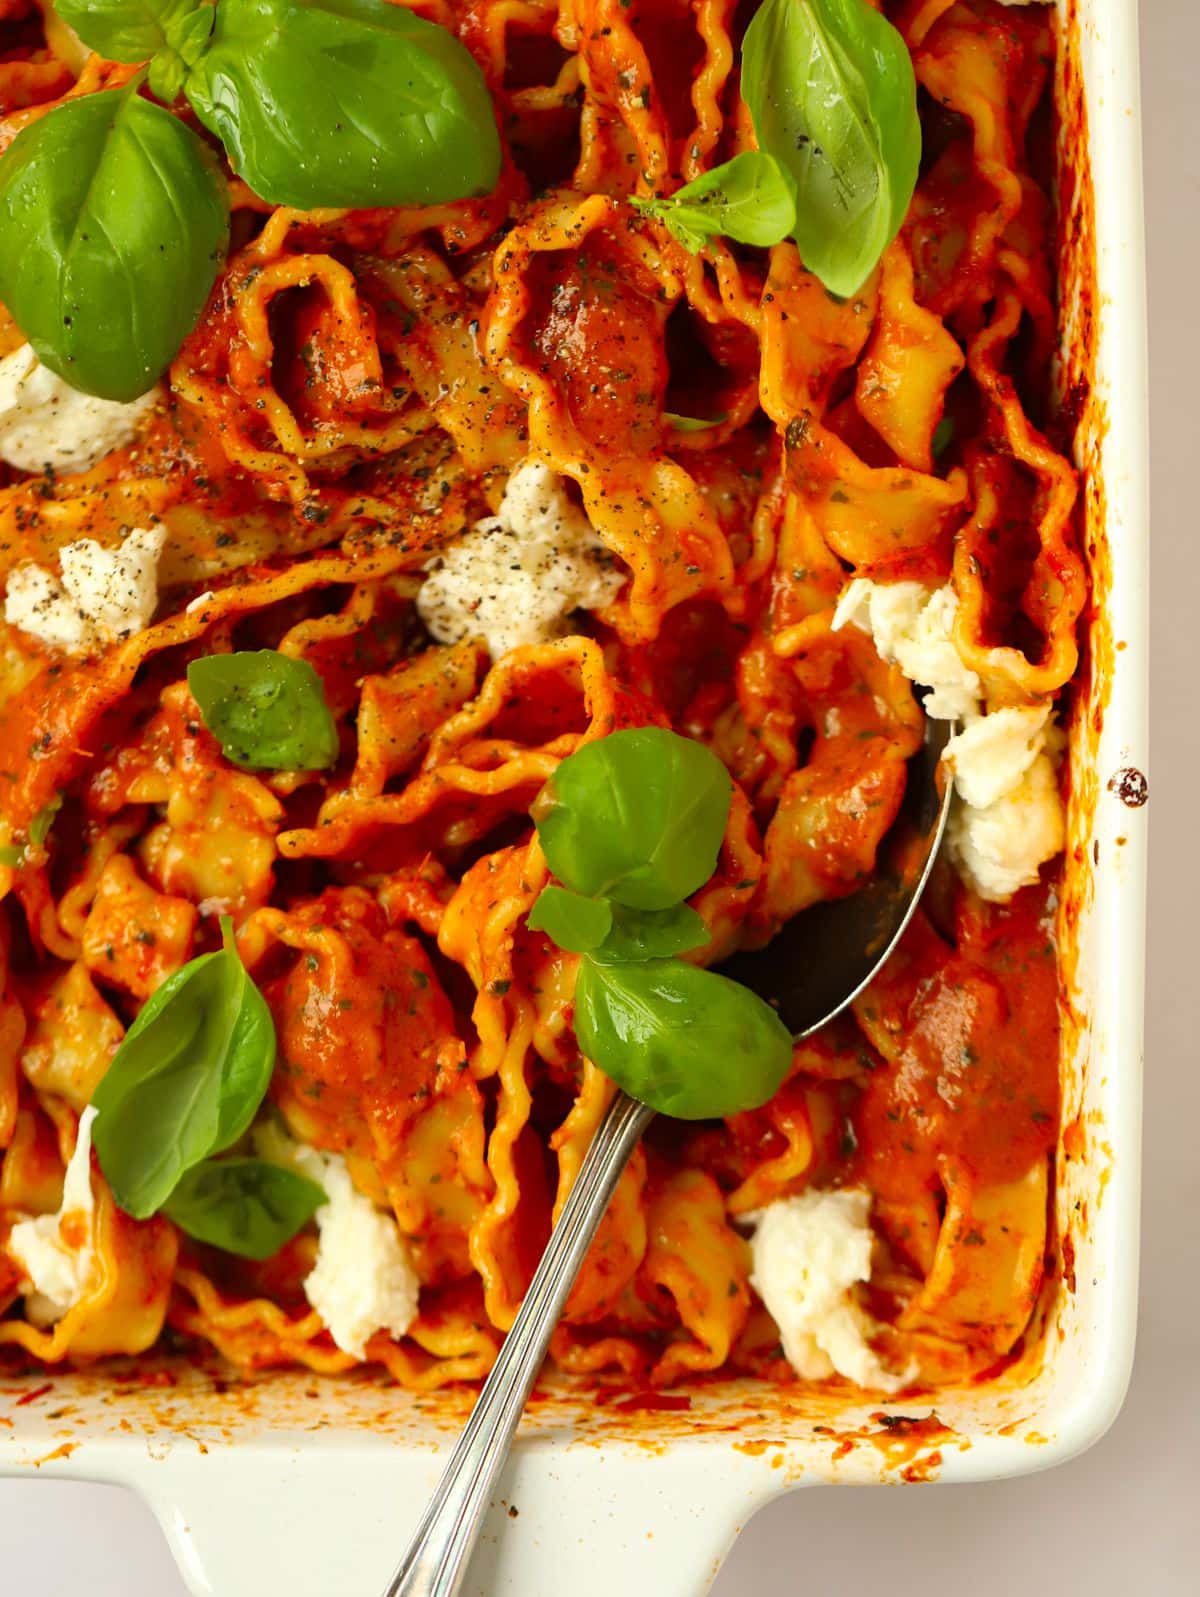 A spoon in a big dish filled with cooked Tomato and Basil Pasta, ready to be served.